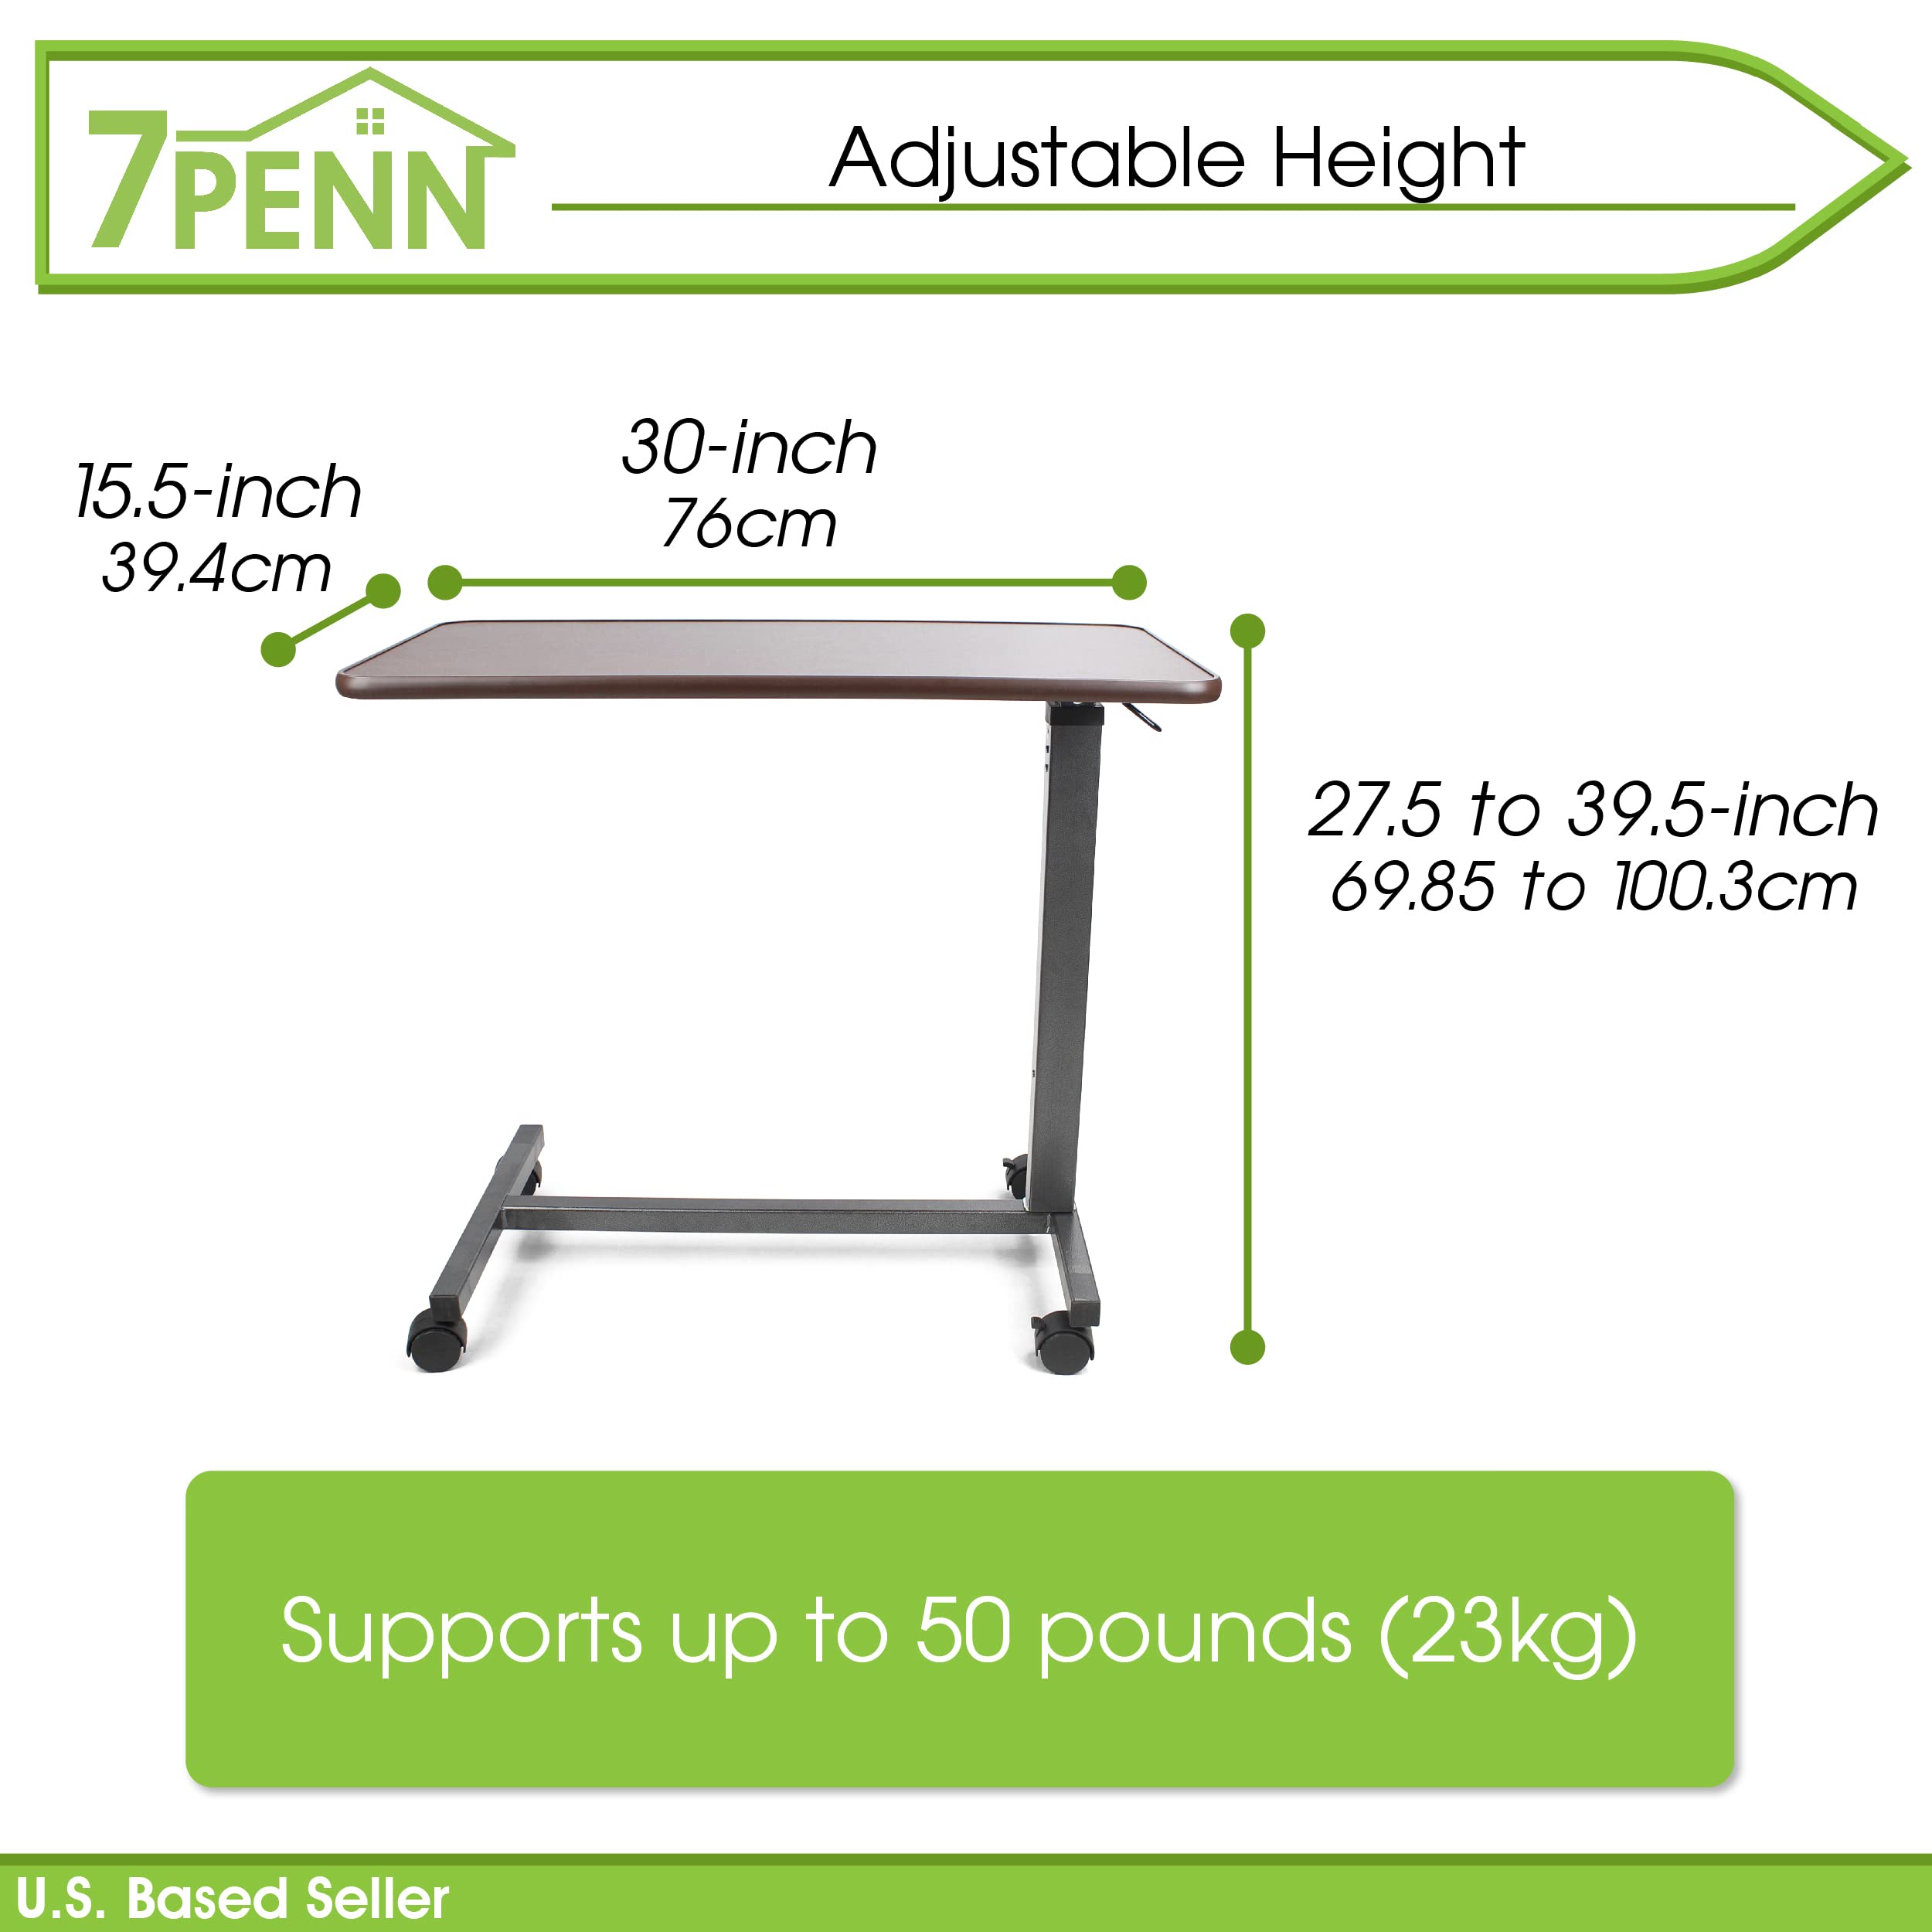 7Penn Adjustable Height Laptop Rolling Tray Bed Table Serving Cart - Bedside Tray Table for Bed or Chair for Handicapped